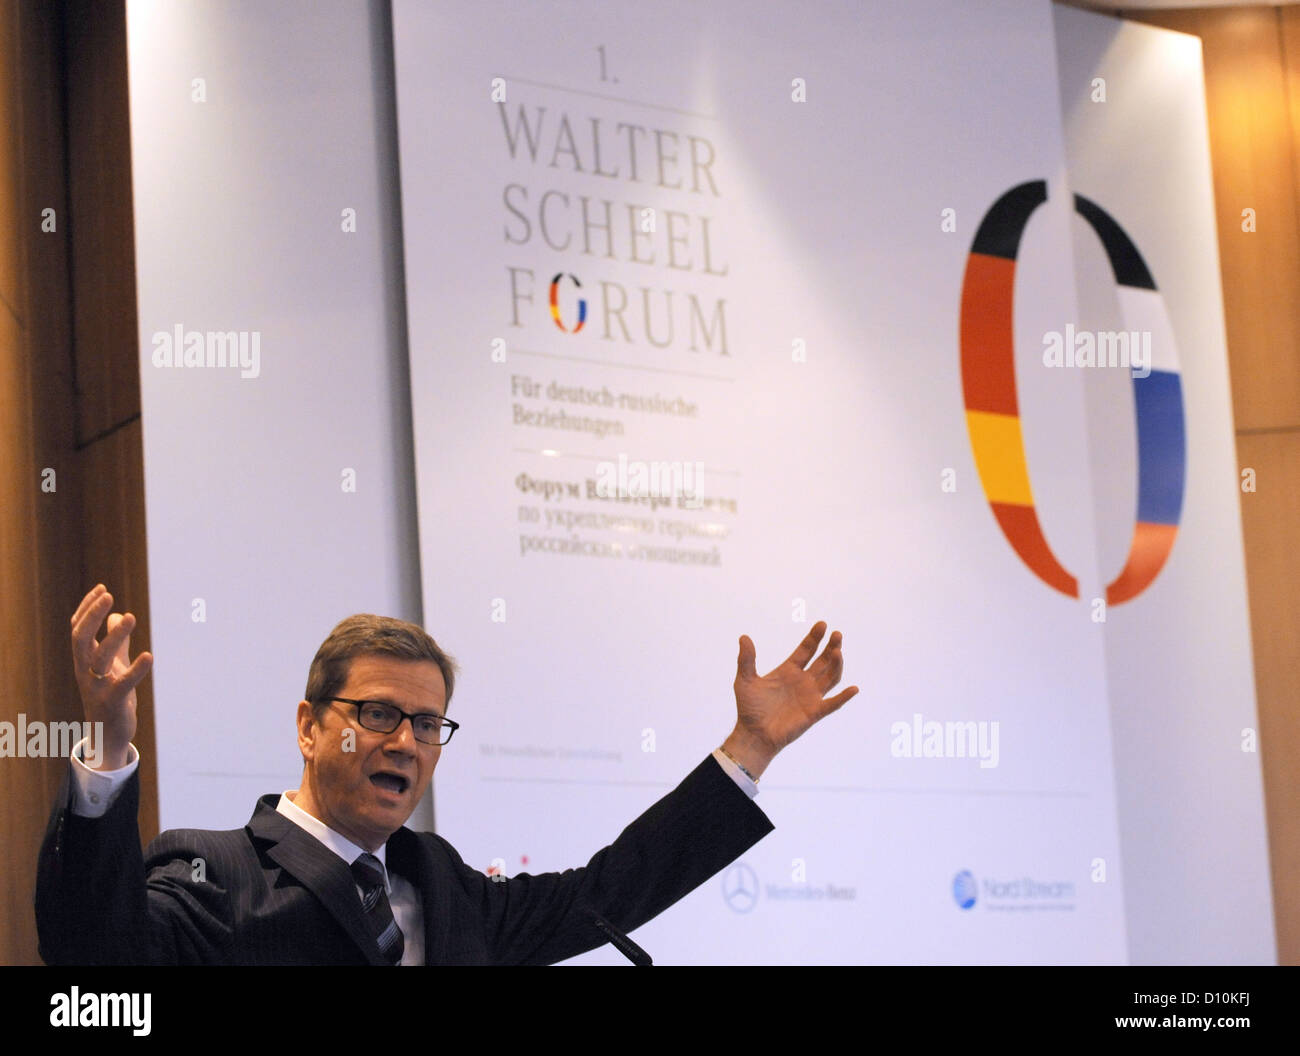 German Minister of Foreign Affairs Guido Westerwelle speaks at the opening of Walter-Scheel Forum in Bad Krozingen, Germany, 04 December 2012. Westerwelle held a keynote lecture about German-Russian relations. Photo: Patrick Seeger Stock Photo